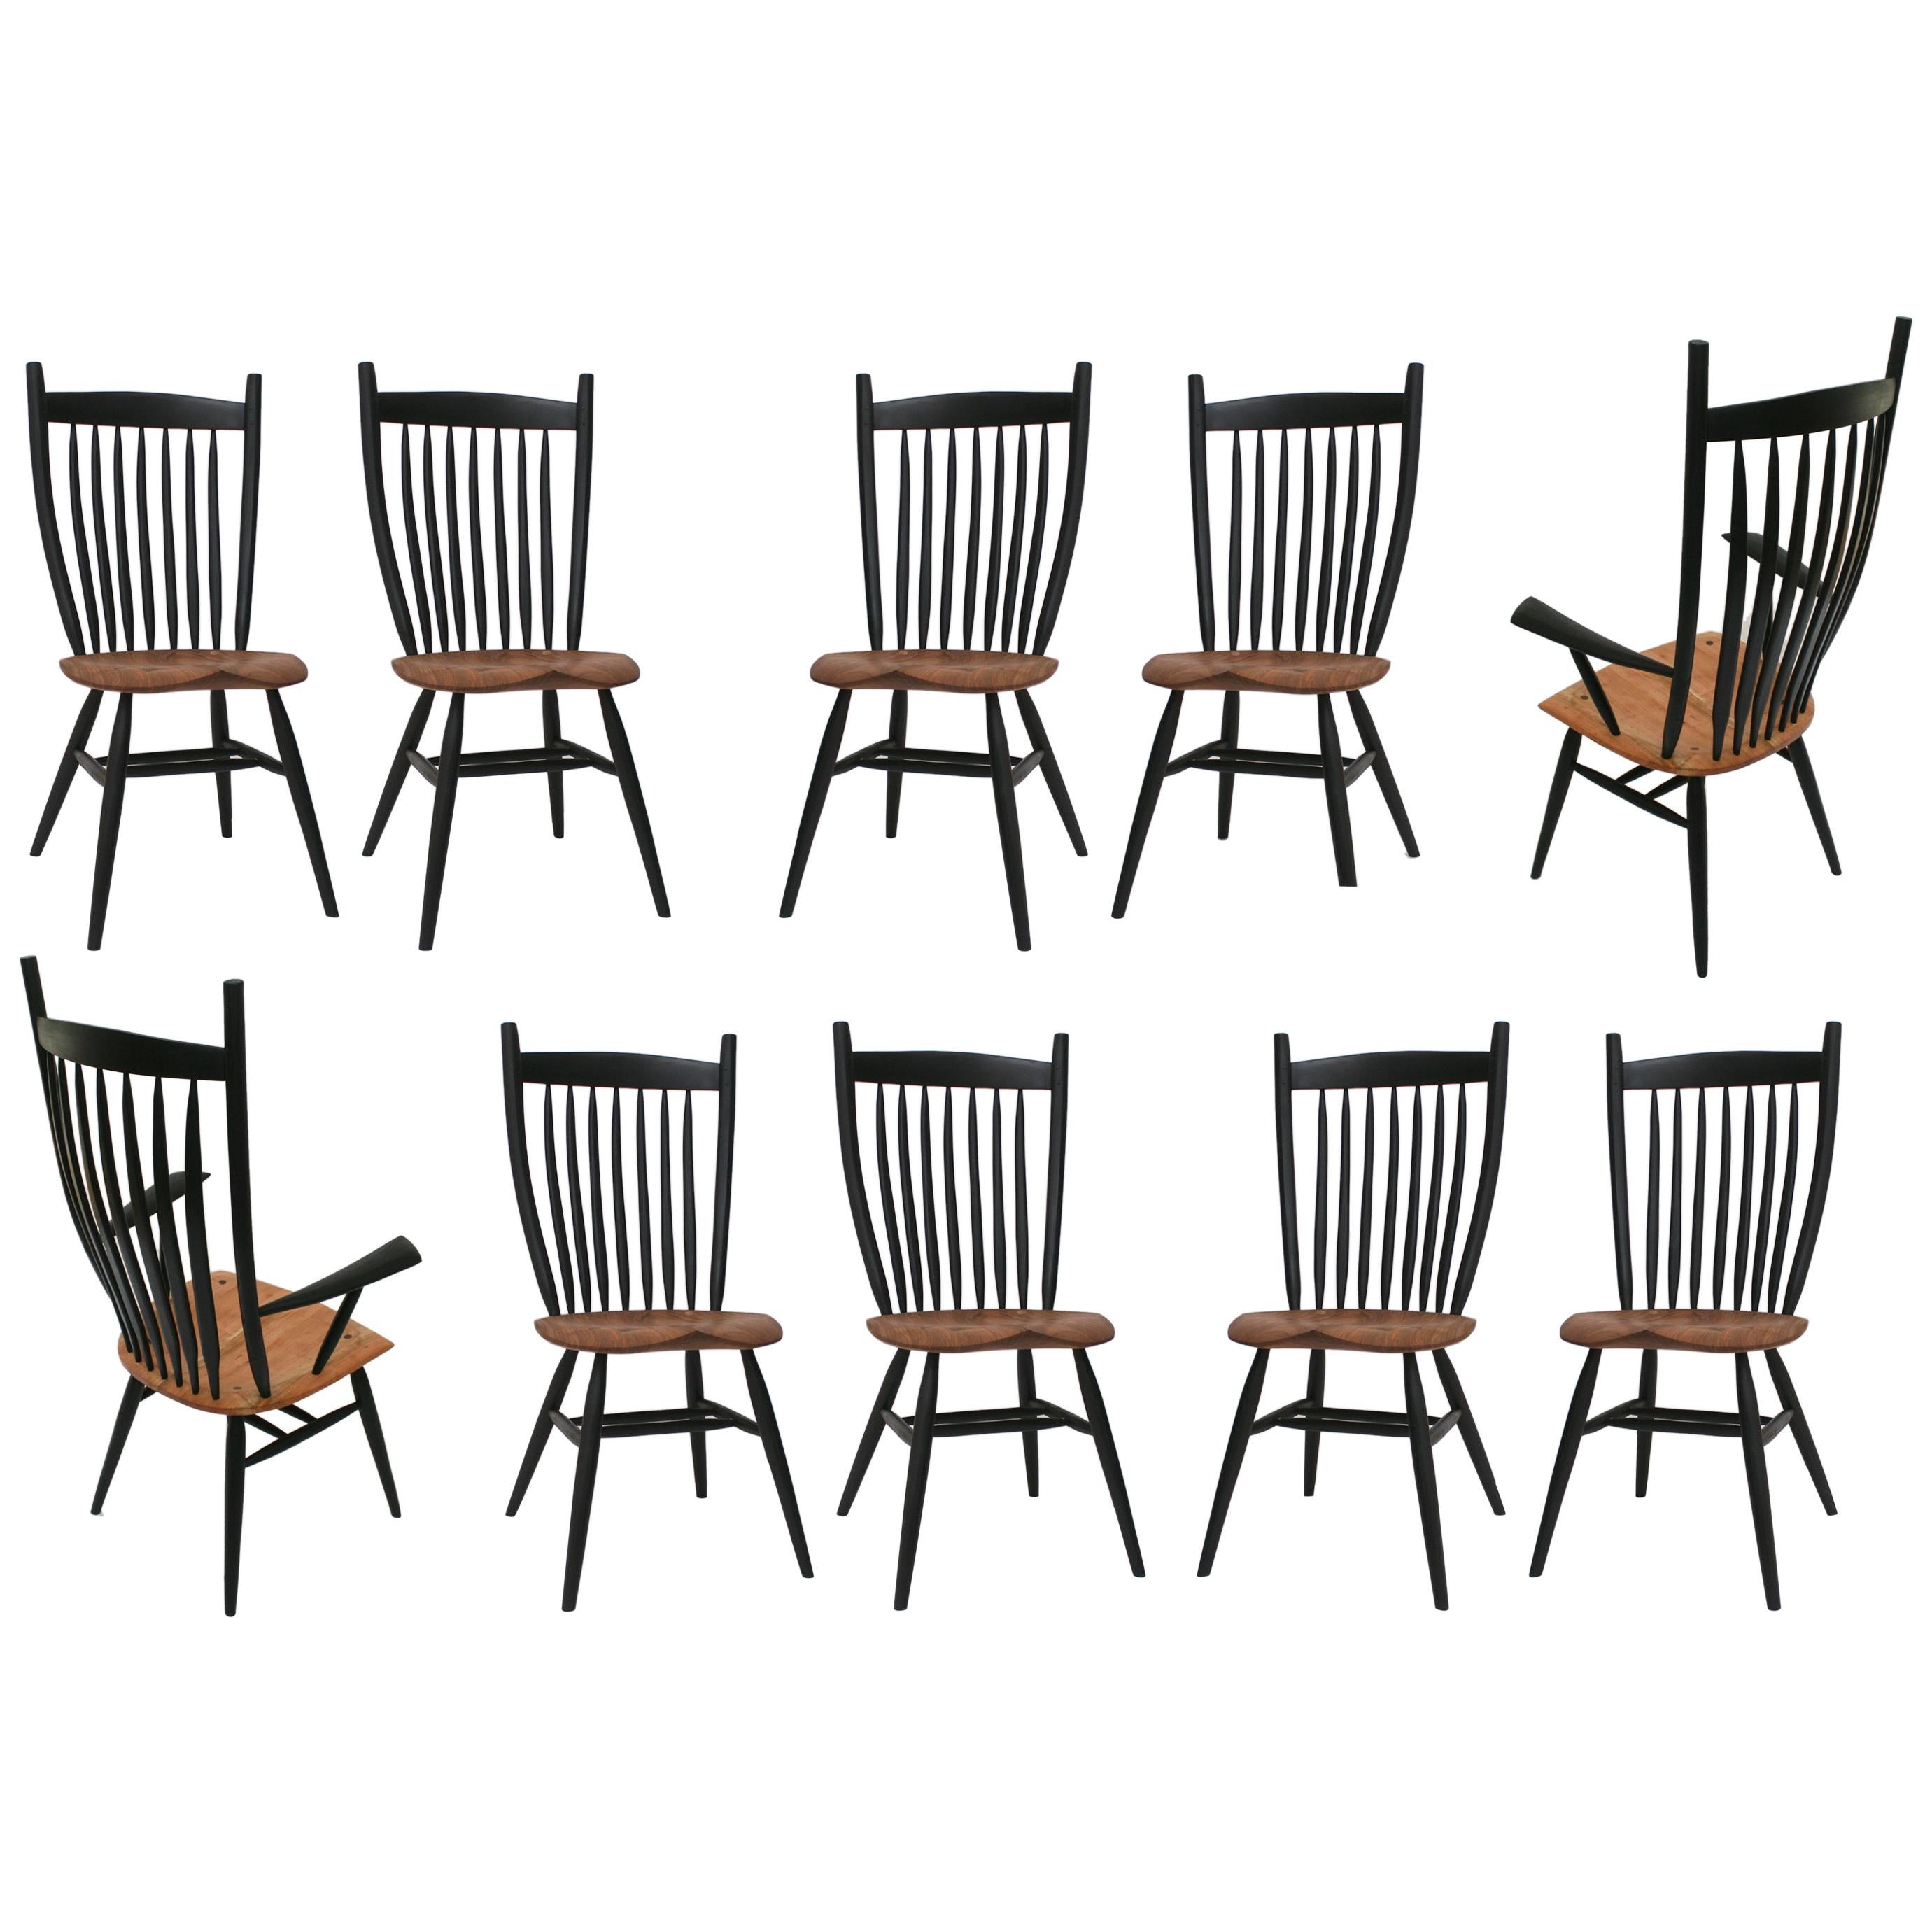 Set of 10 Handcrafted Studio Bent Chairs by Fabian Fischer, Germany, 2023 For Sale